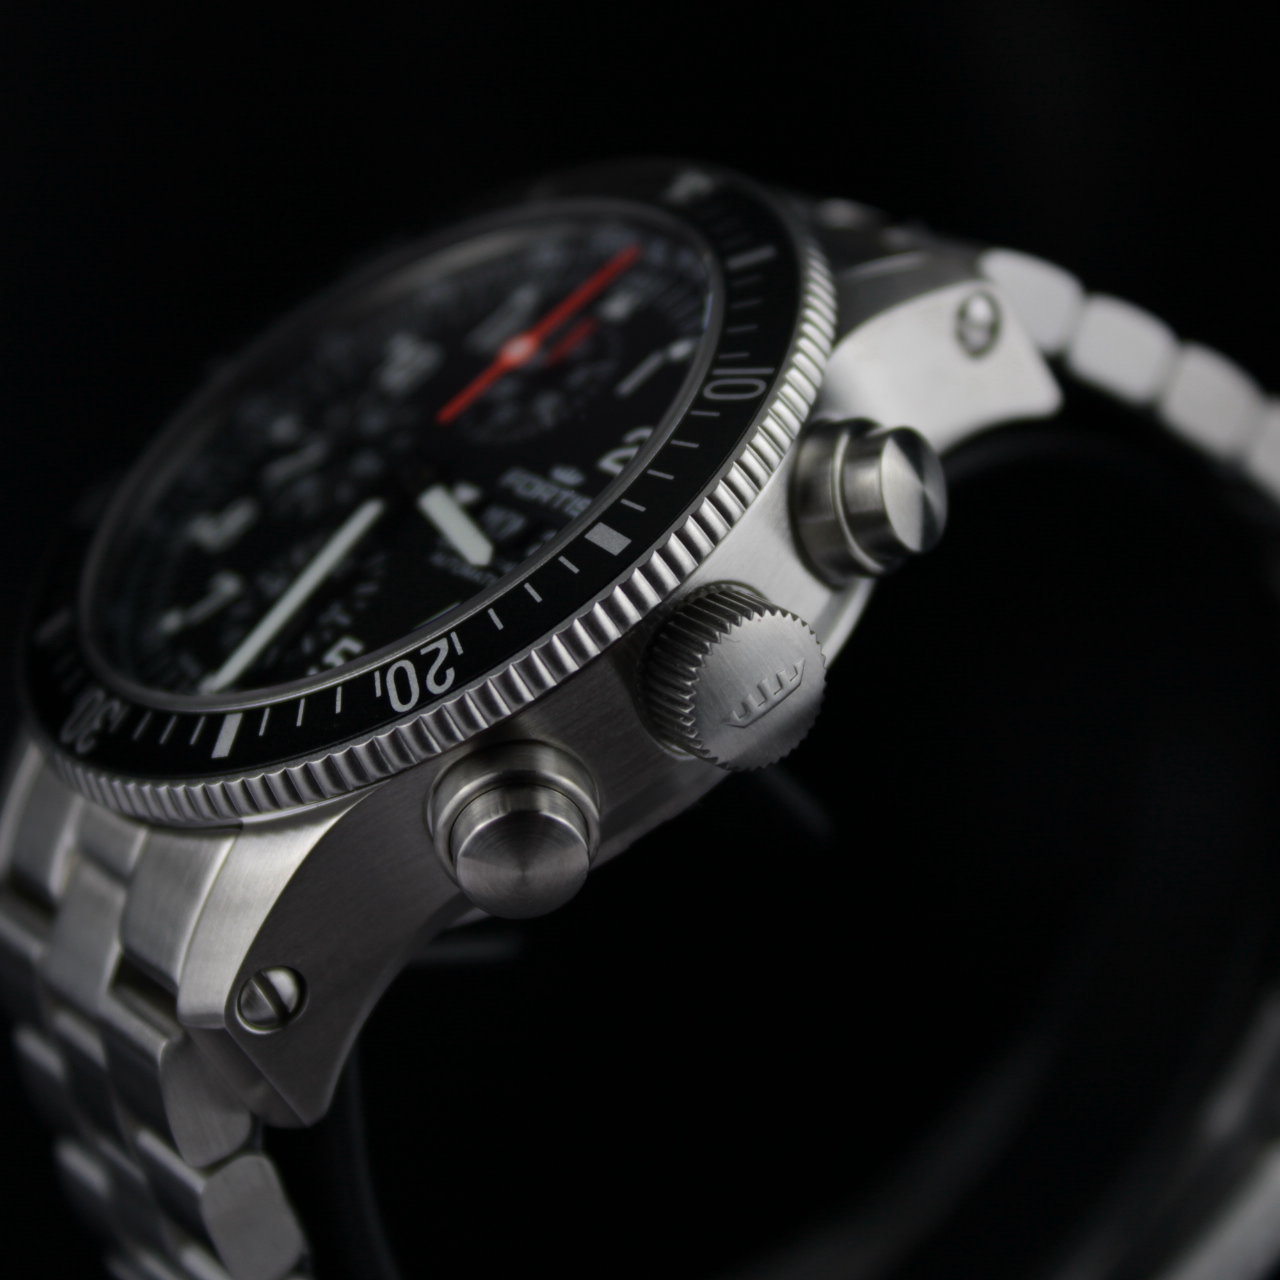 Fortis OFFICIAL COSMONAUTS CHRONOGRAPH, 638.10.11